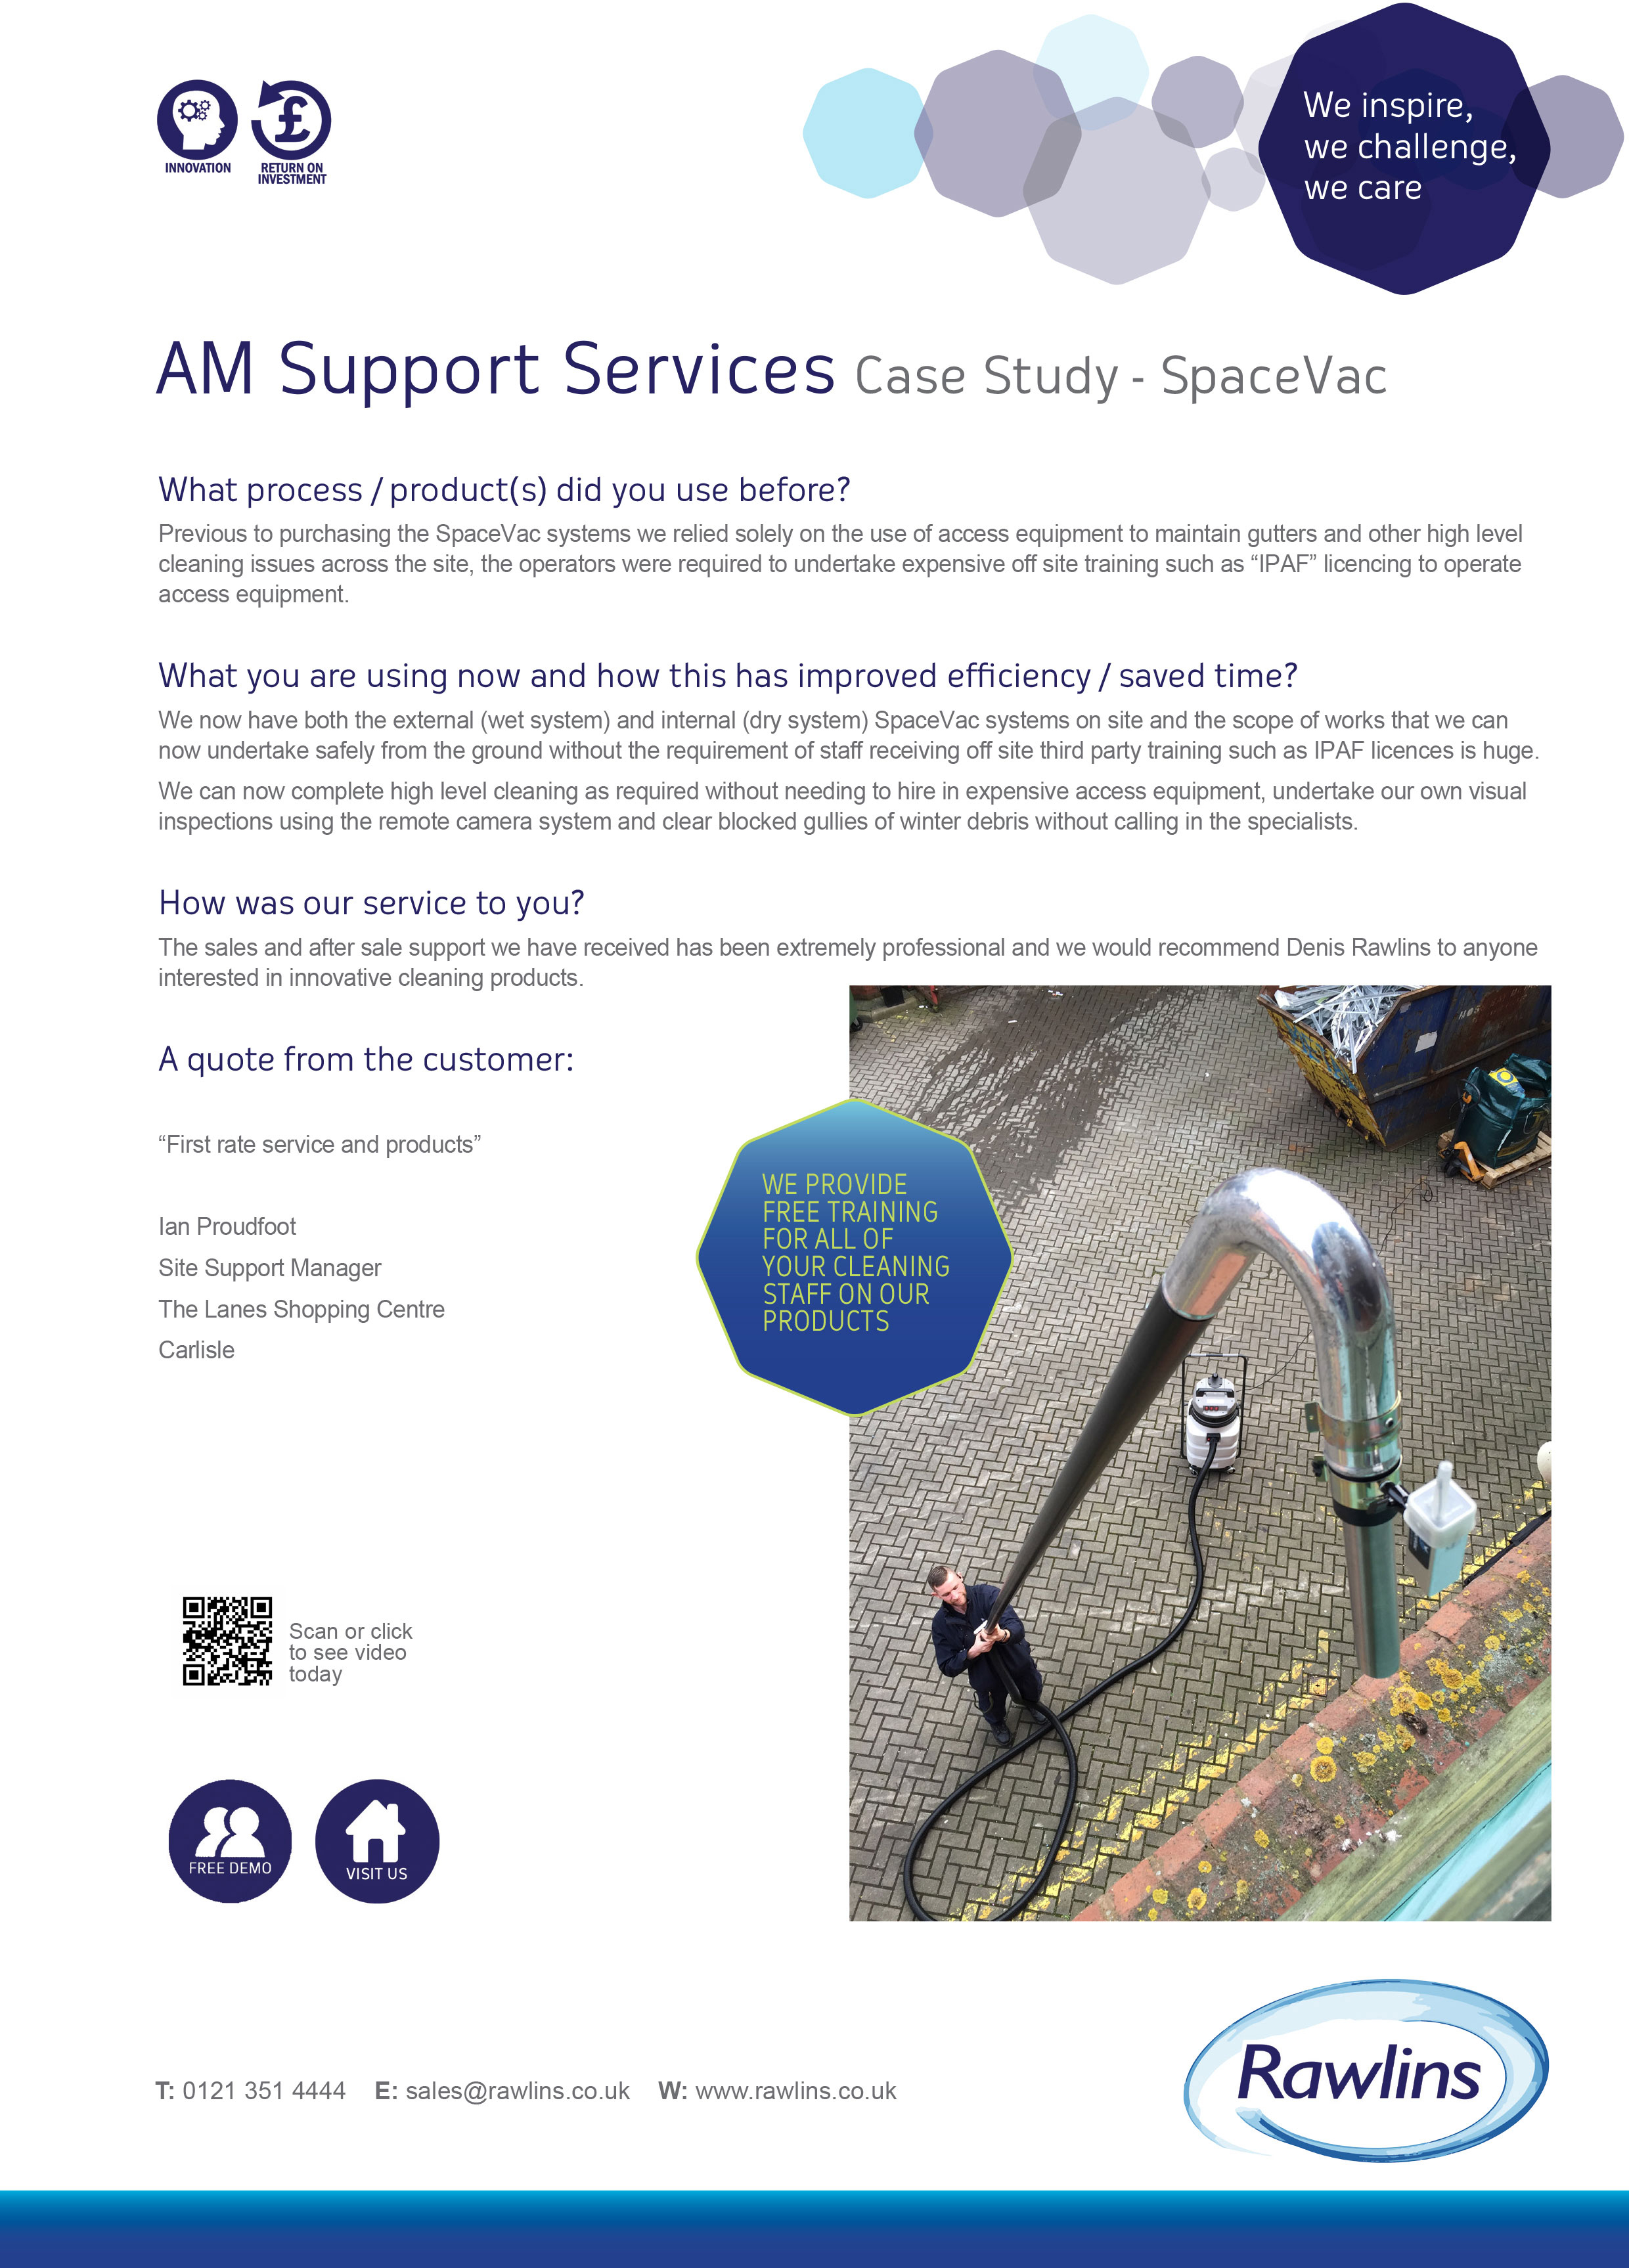 Case Study - AM Support Services